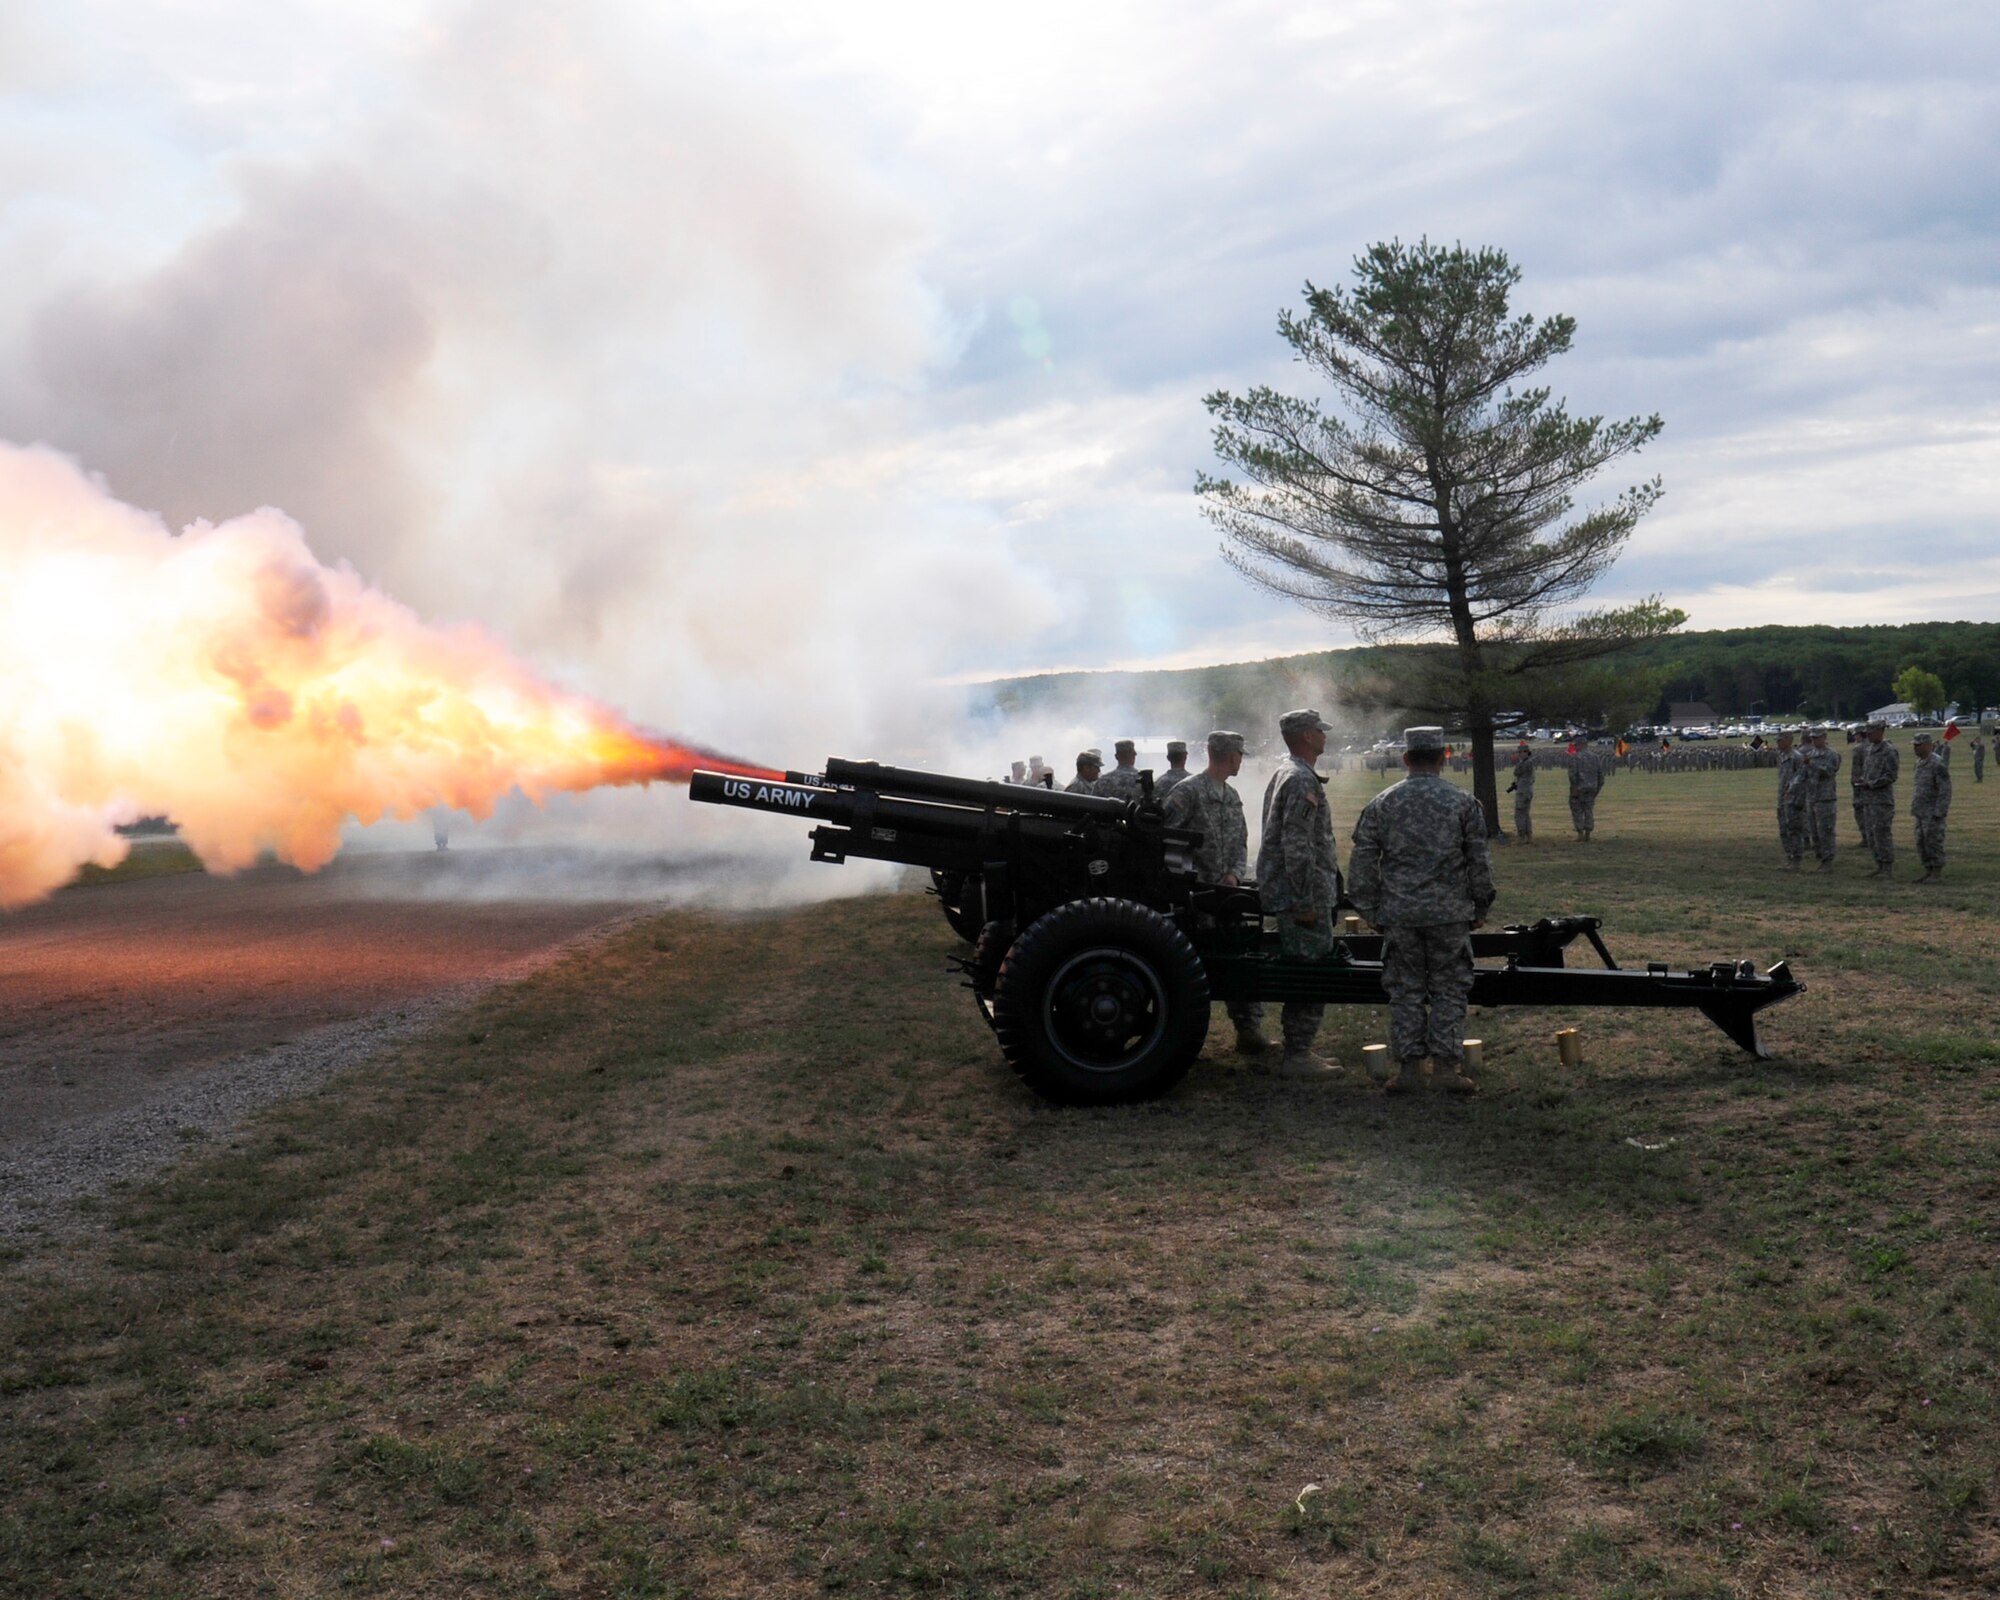 U.S. Army from the 1st Battery-119th Field Artillery Regiment fire a 21- gun salute in honor of Michigan Gov. Rick Snyder’s arrival at Camp Grayling, Camp Grayling, Mich., July 19, 2013. The salute was the commencement for the pass in review ceremony for Camp Grayling’s 100 year anniversary. (Air National Guard photo by Tech. Sgt. David Eichaker/released)